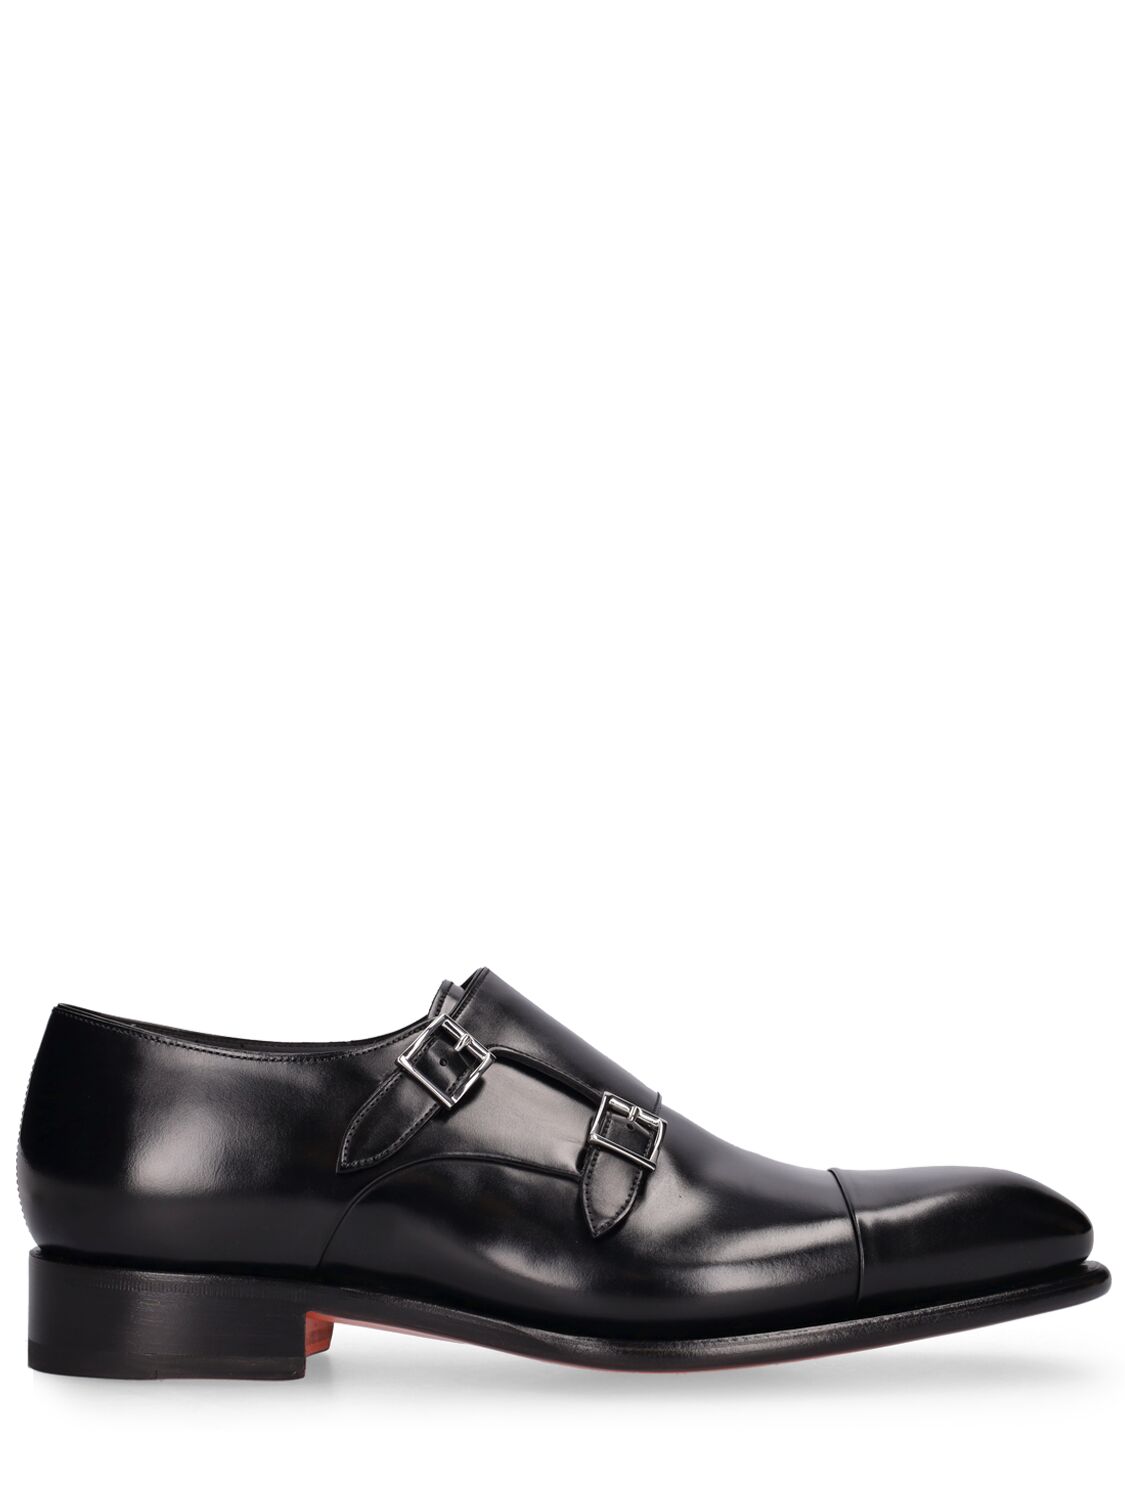 Santoni Leather Shoes With Buckles In Black